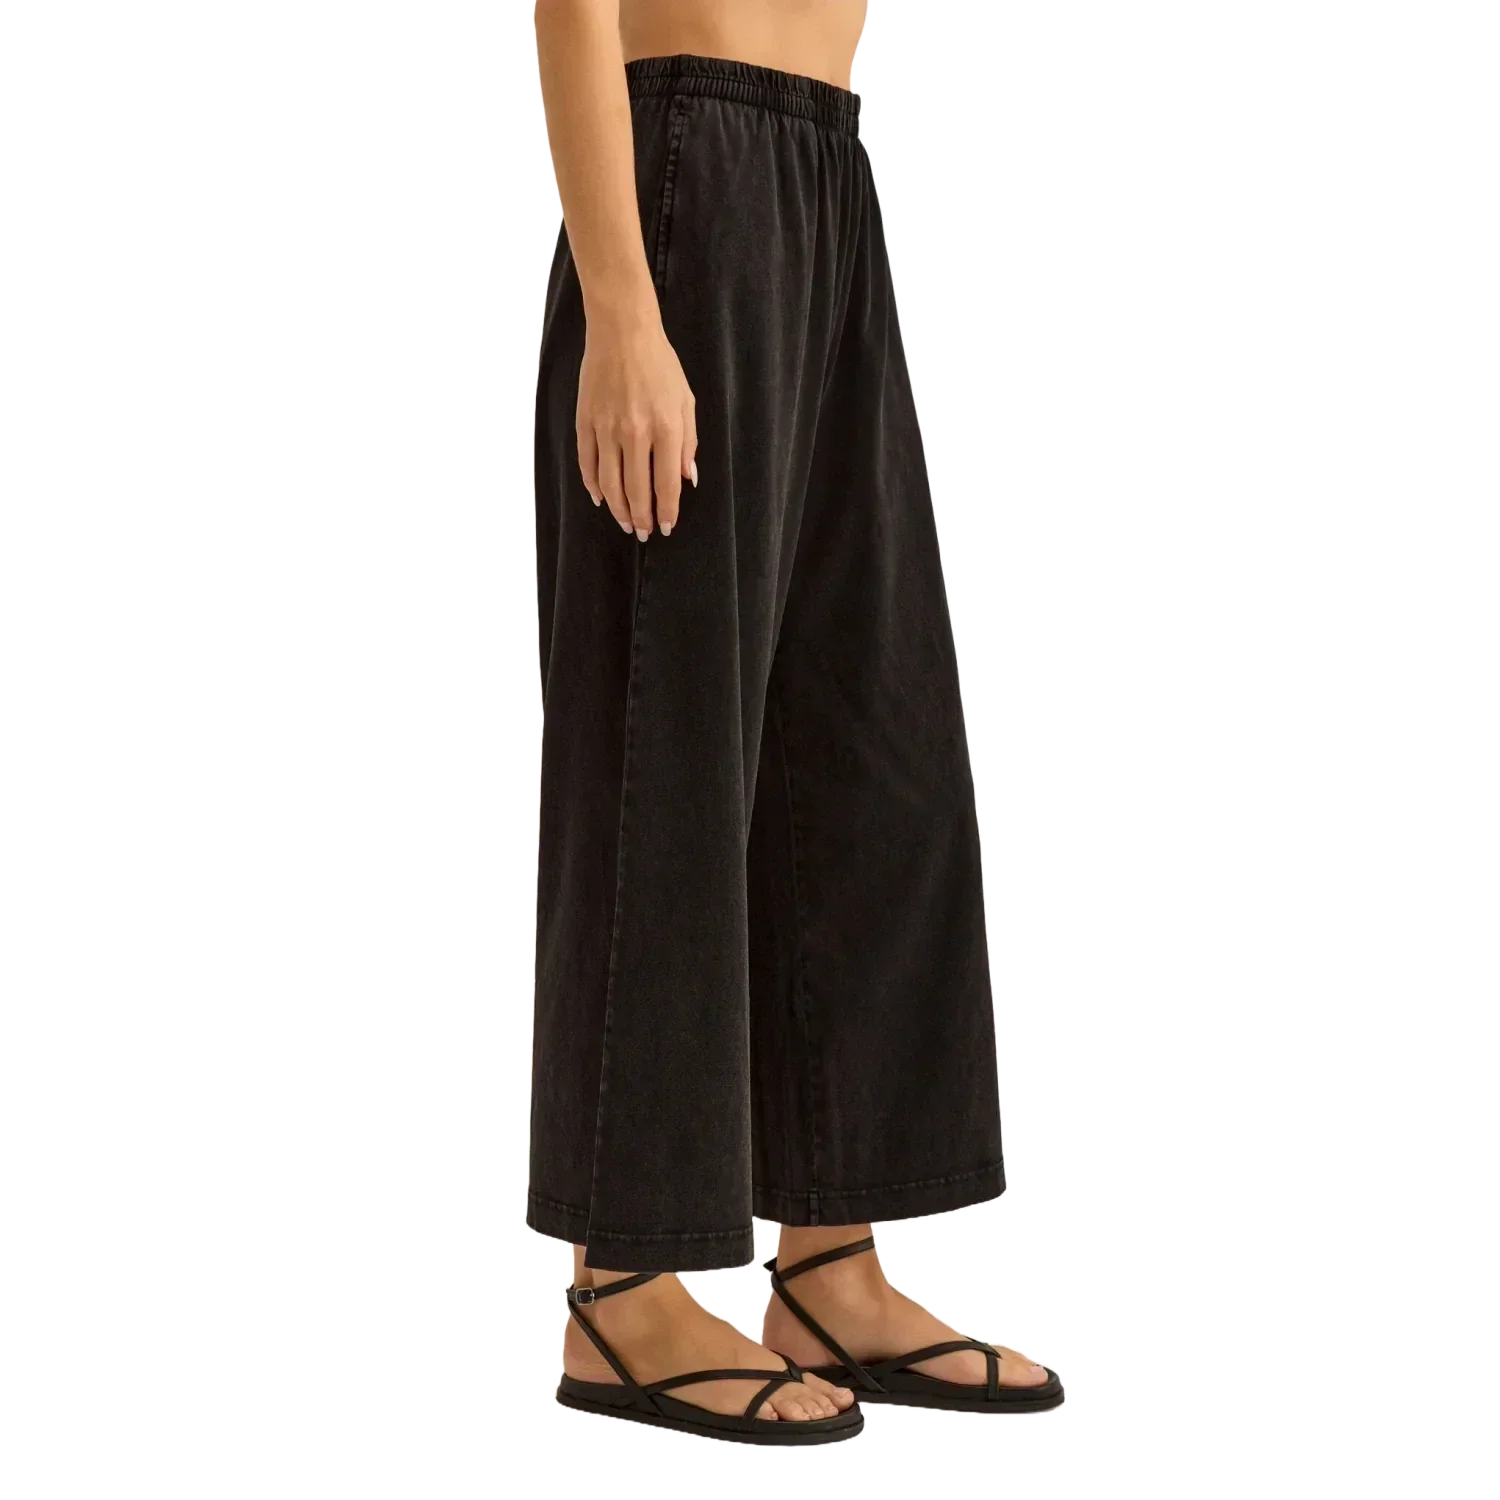 Z Supply 02. WOMENS APPAREL - WOMENS PANTS - WOMENS PANTS CASUAL Women's Scout Jersey Flare Pocket Pant BLK BLACK